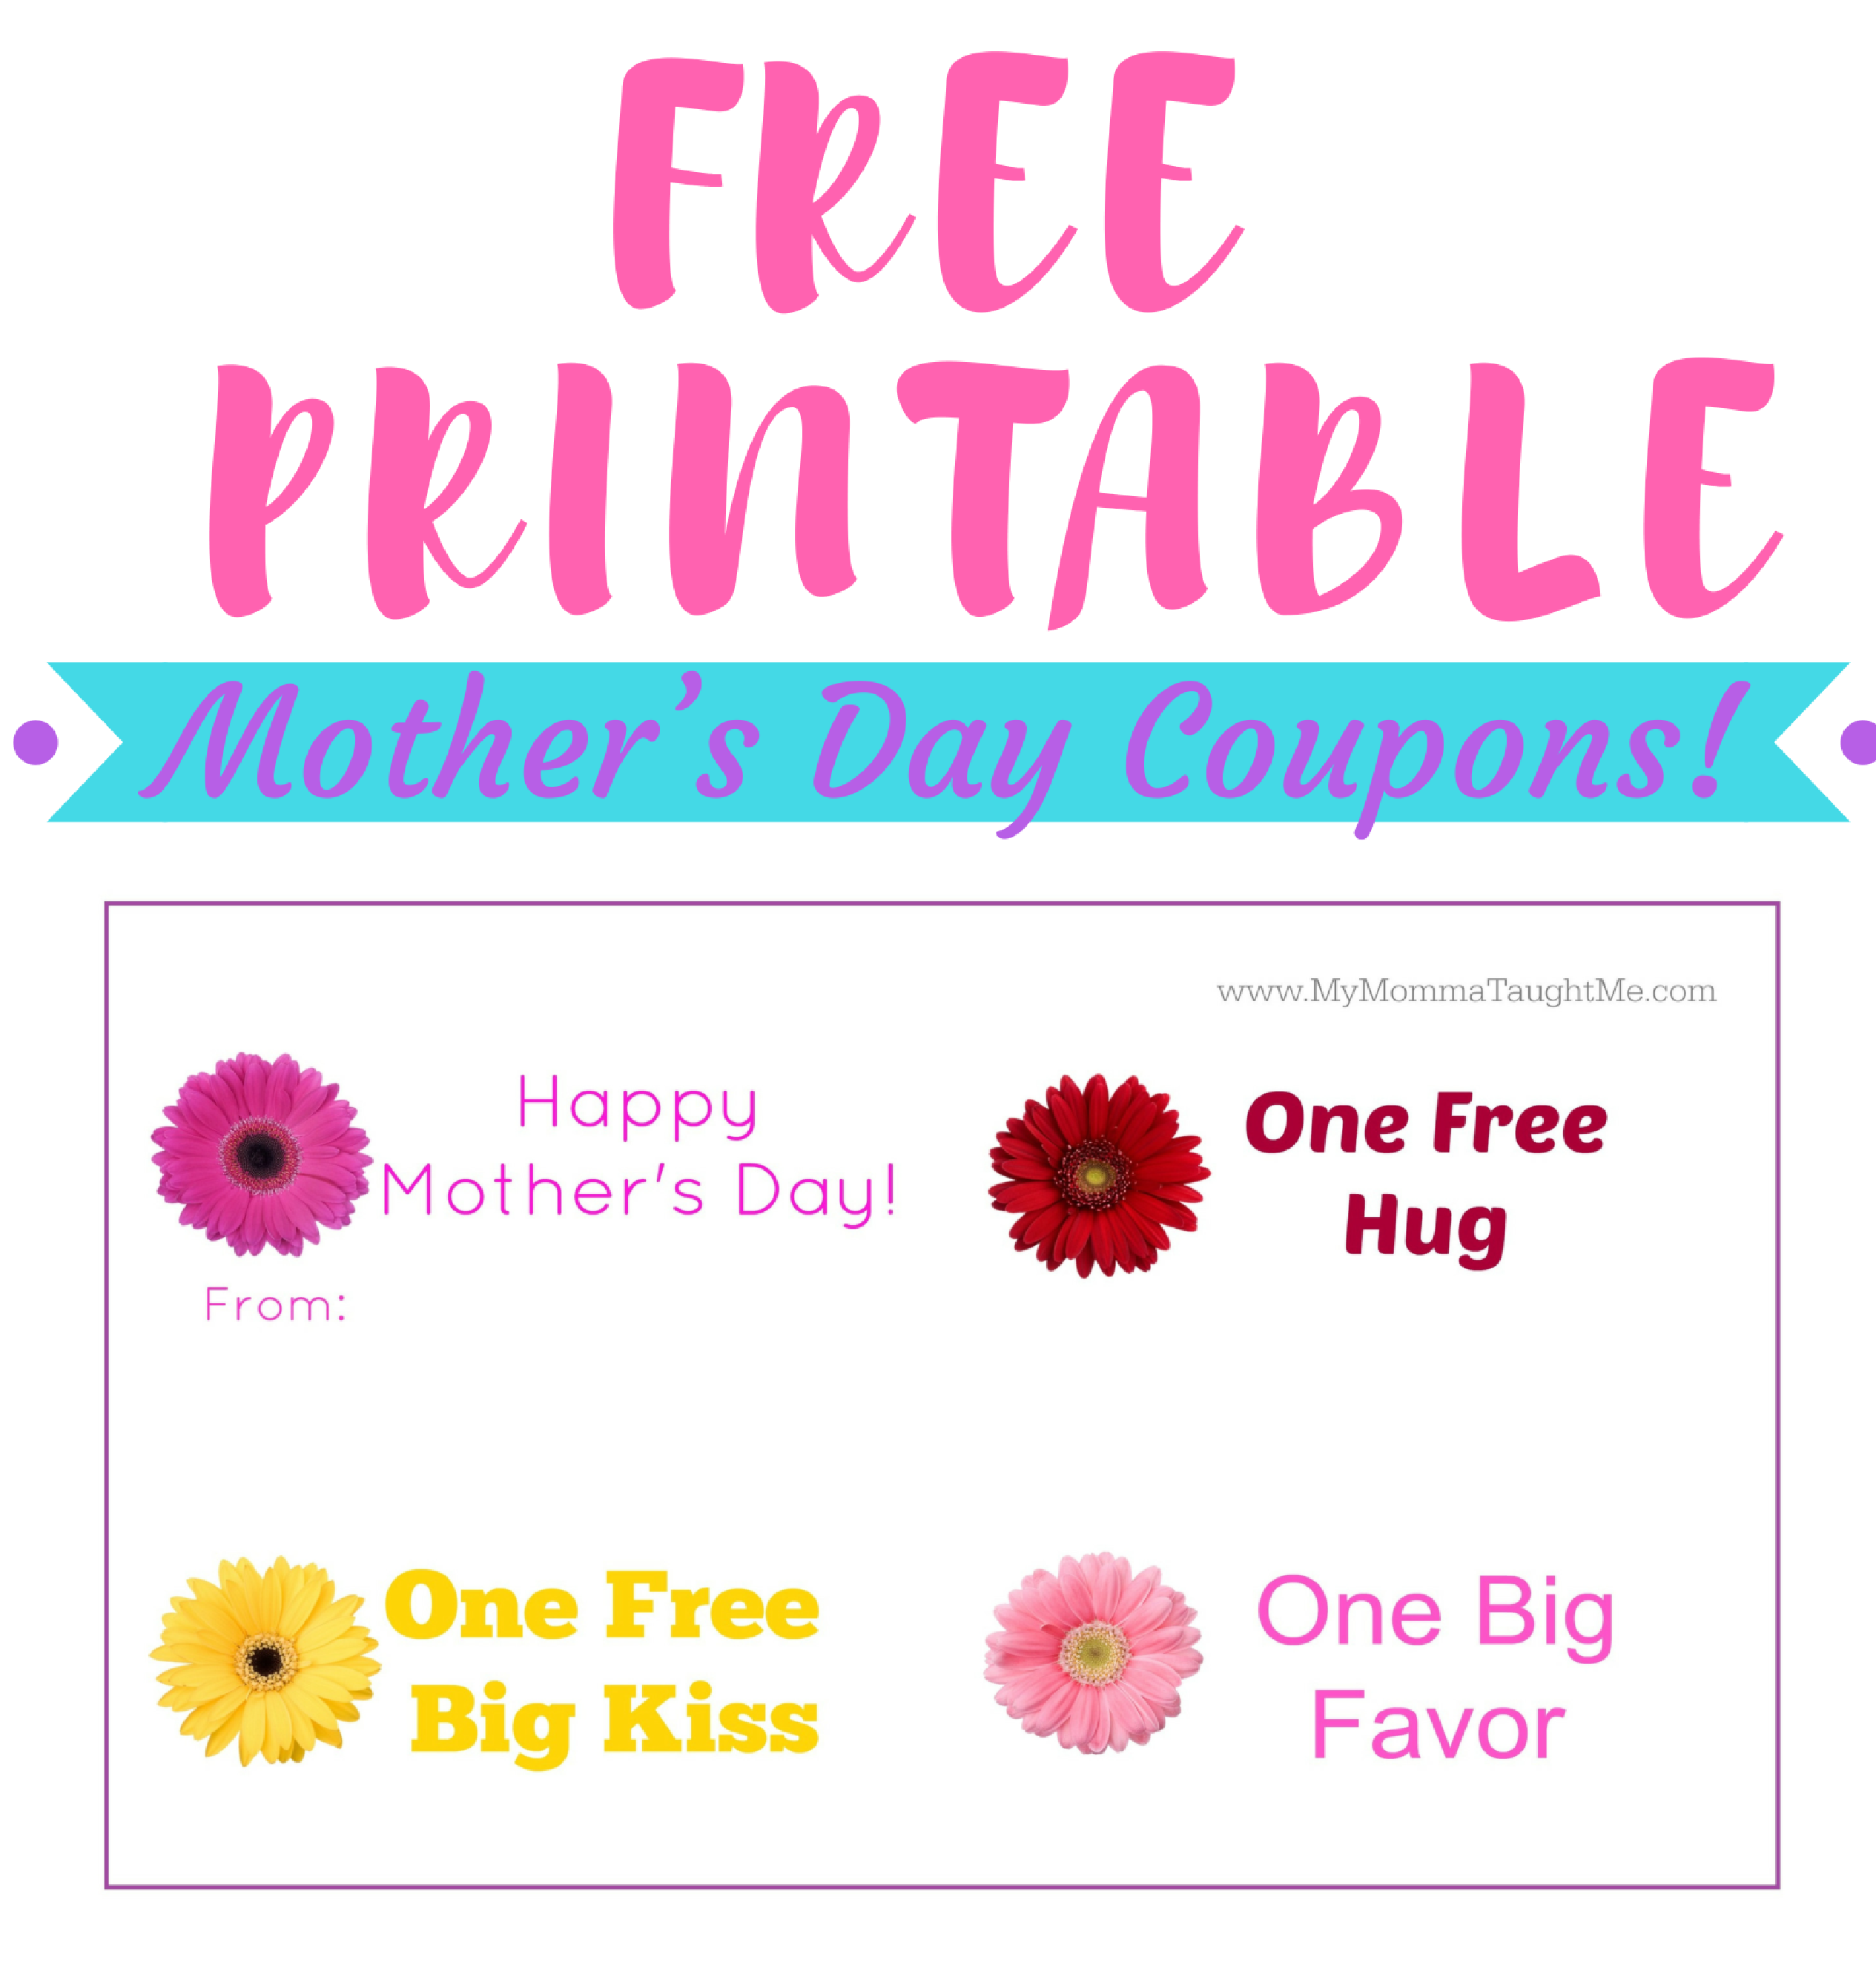 free-printable-mother-s-day-coupons-my-momma-taught-me